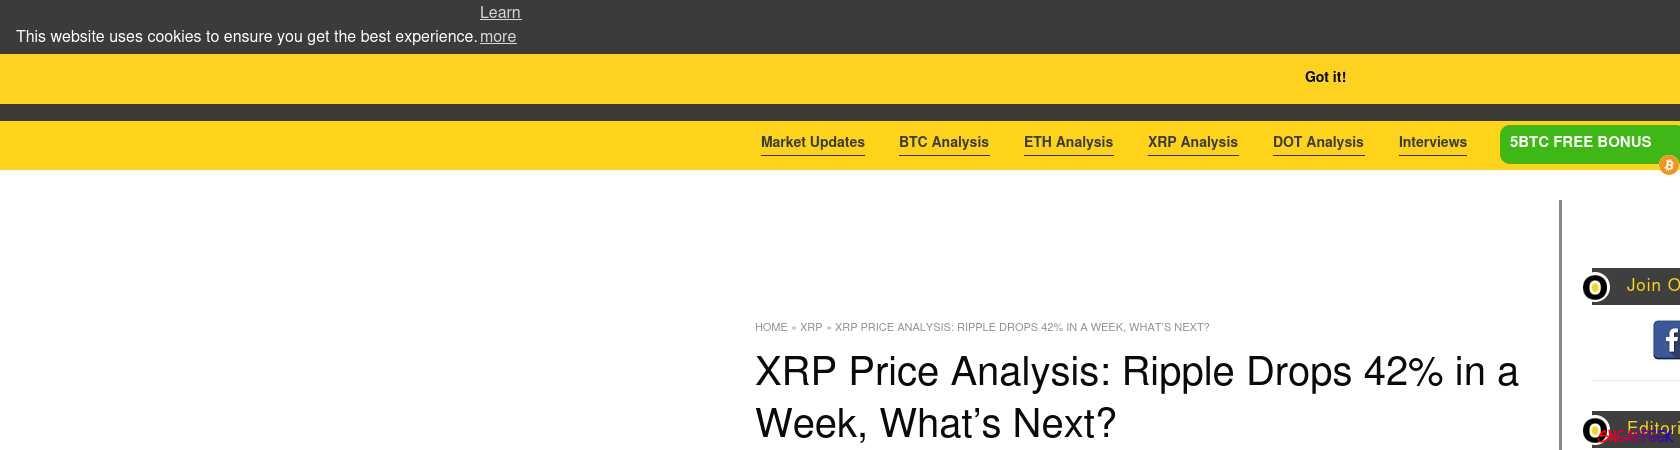 Read the full Article:  ⭲ XRP Price Analysis: Ripple Drops 42% in a Week, What’s Next?